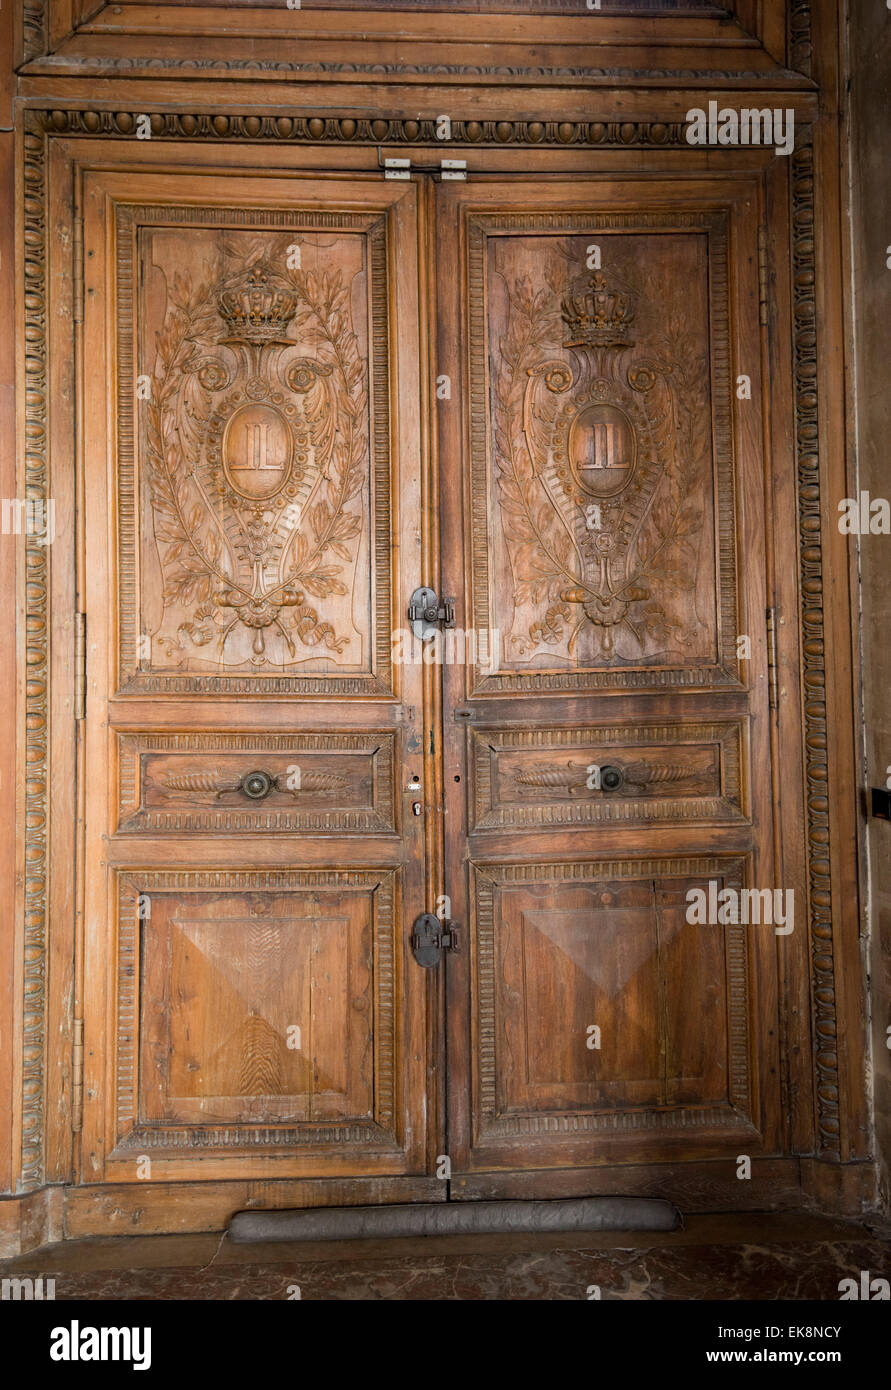 A large old wooden door in the Louvre Museum (Musee du Louvre) in Paris, France Europe EU Stock Photo